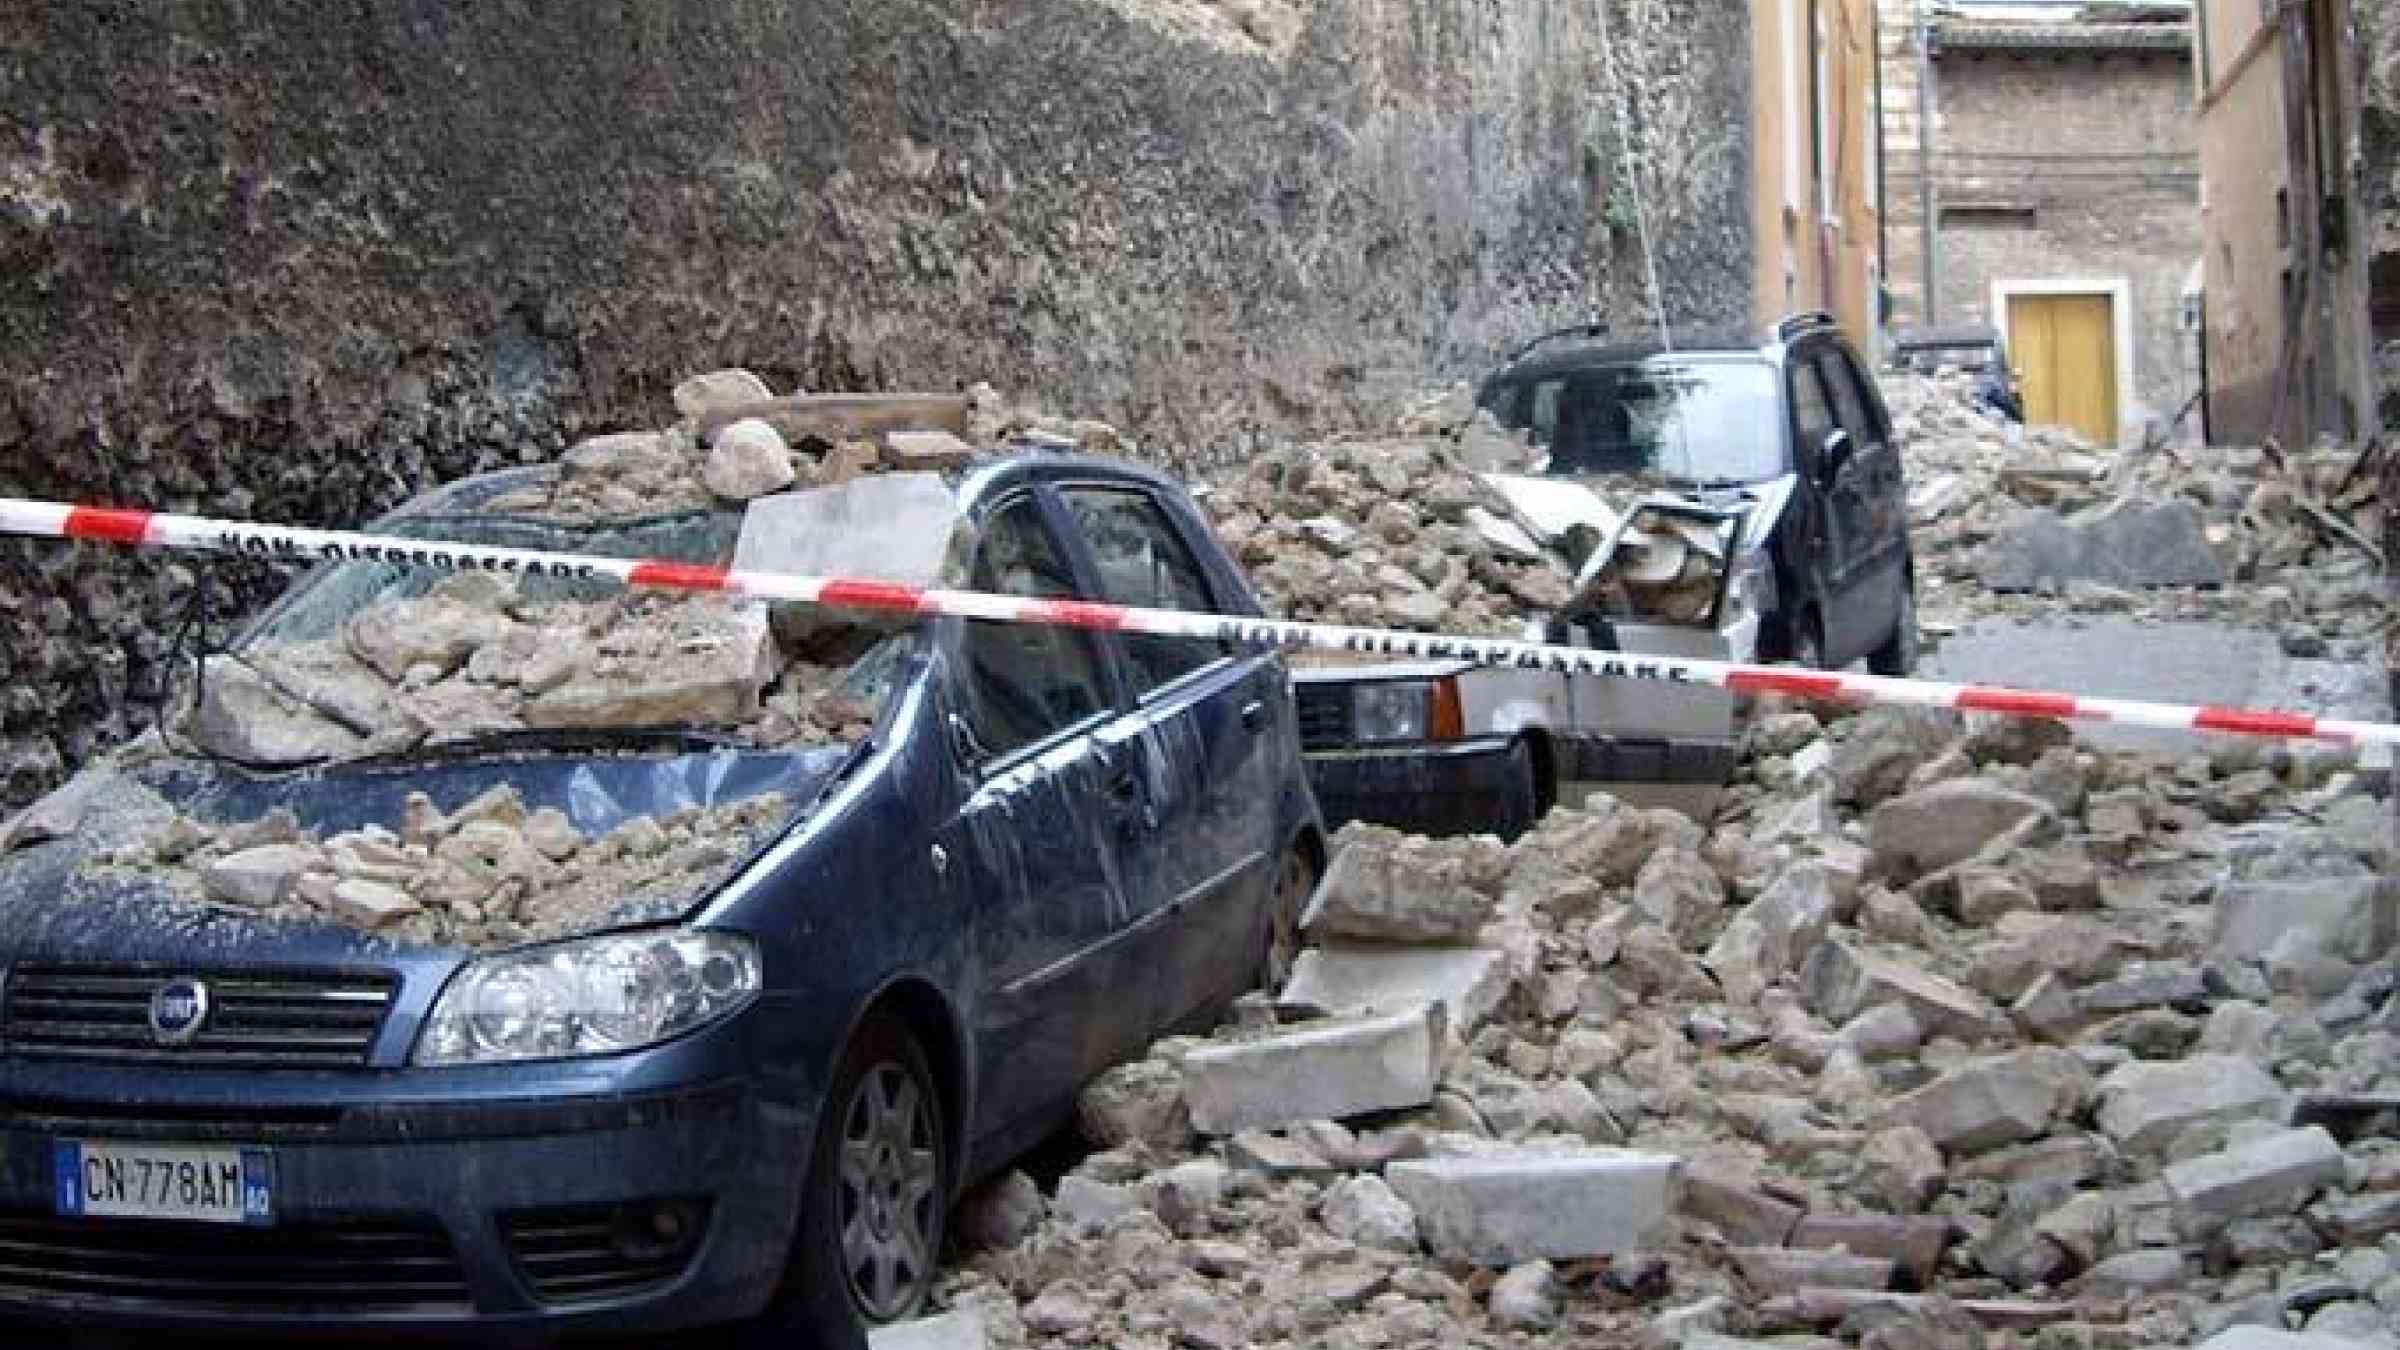 Damage in L’Aquila, Italy, following the 2009 earthquake. Credit: UCL Mathematical and Physical Sciences from London, UK (CC BY-2.0)